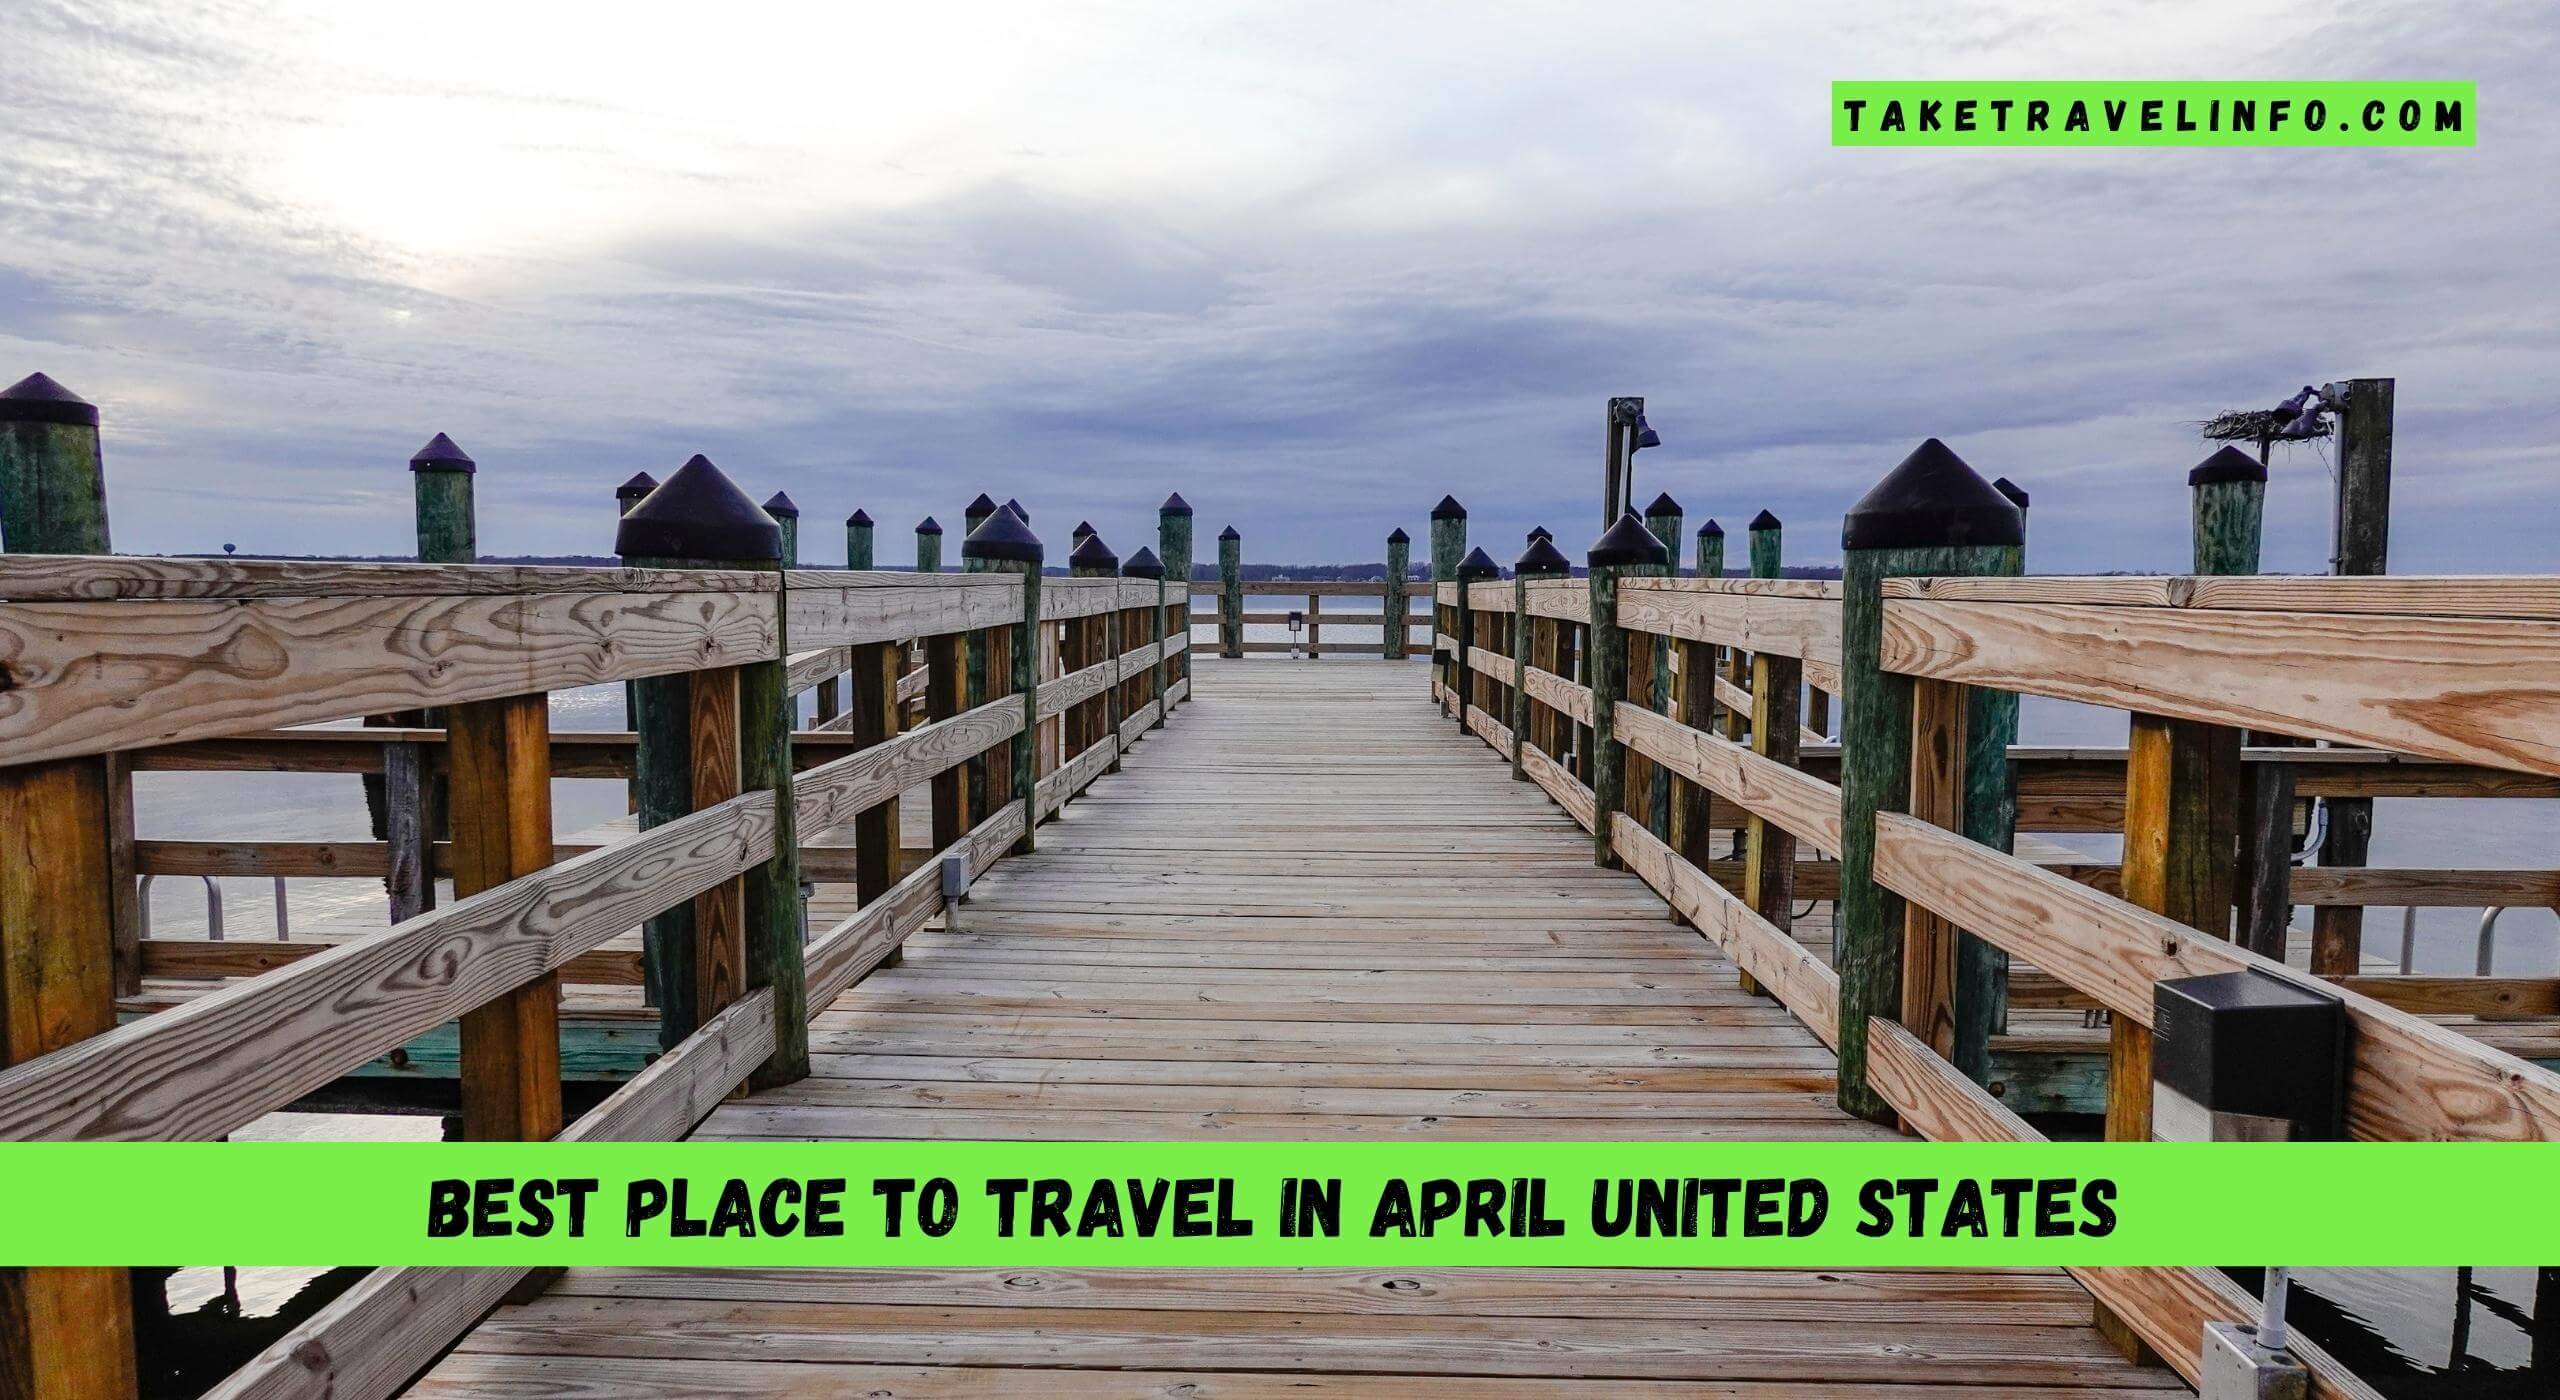 Best Place To Travel In April United States